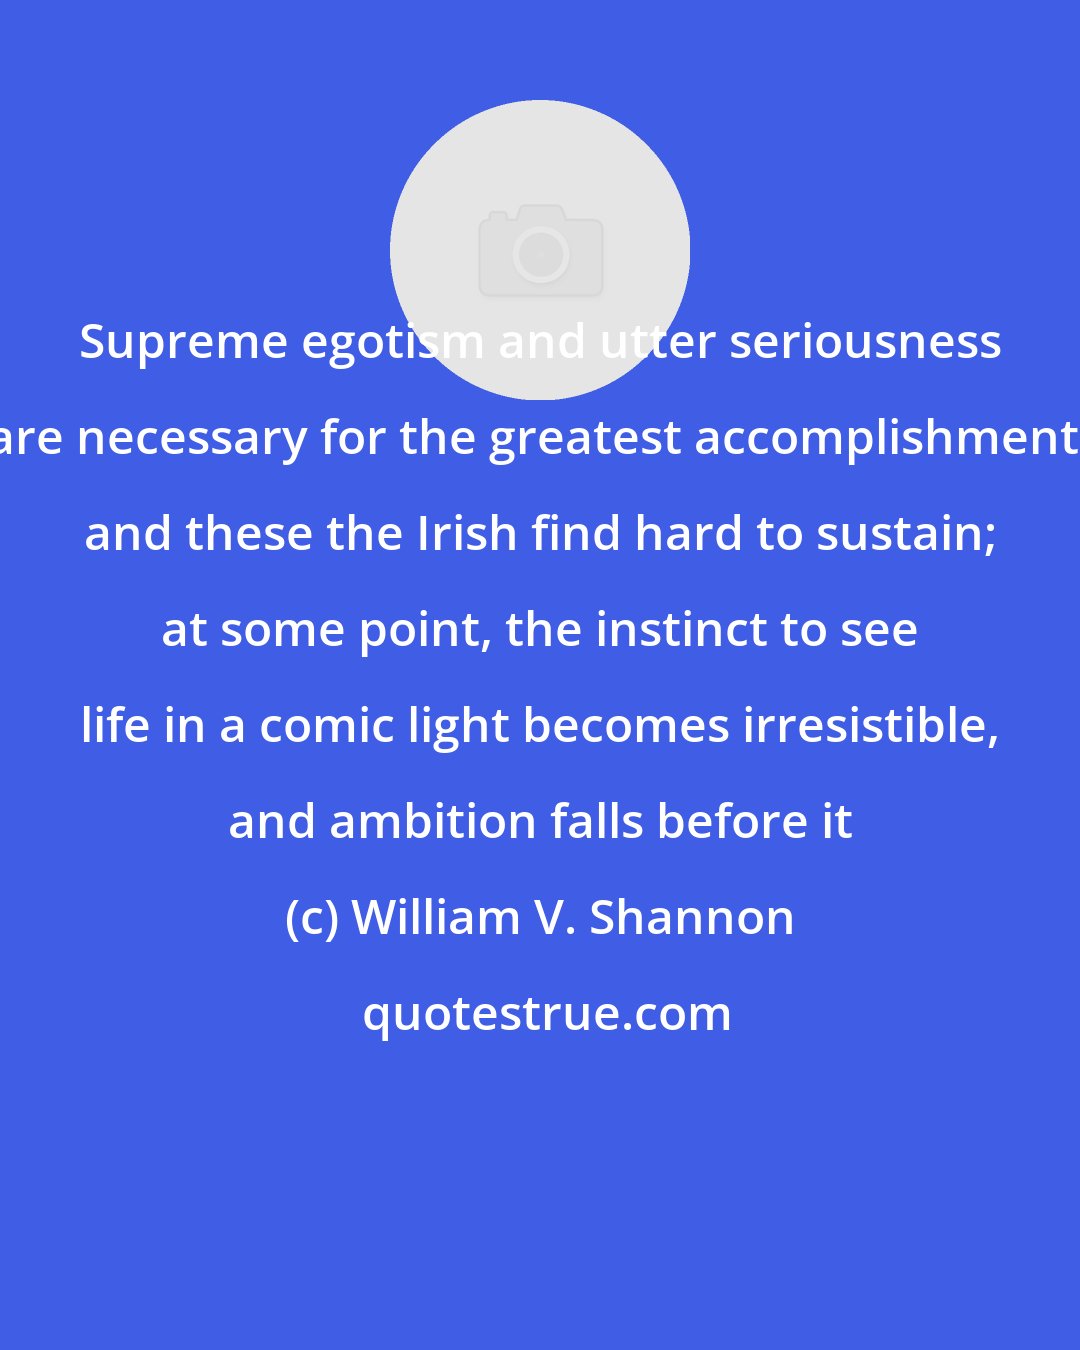 William V. Shannon: Supreme egotism and utter seriousness are necessary for the greatest accomplishment, and these the Irish find hard to sustain; at some point, the instinct to see life in a comic light becomes irresistible, and ambition falls before it